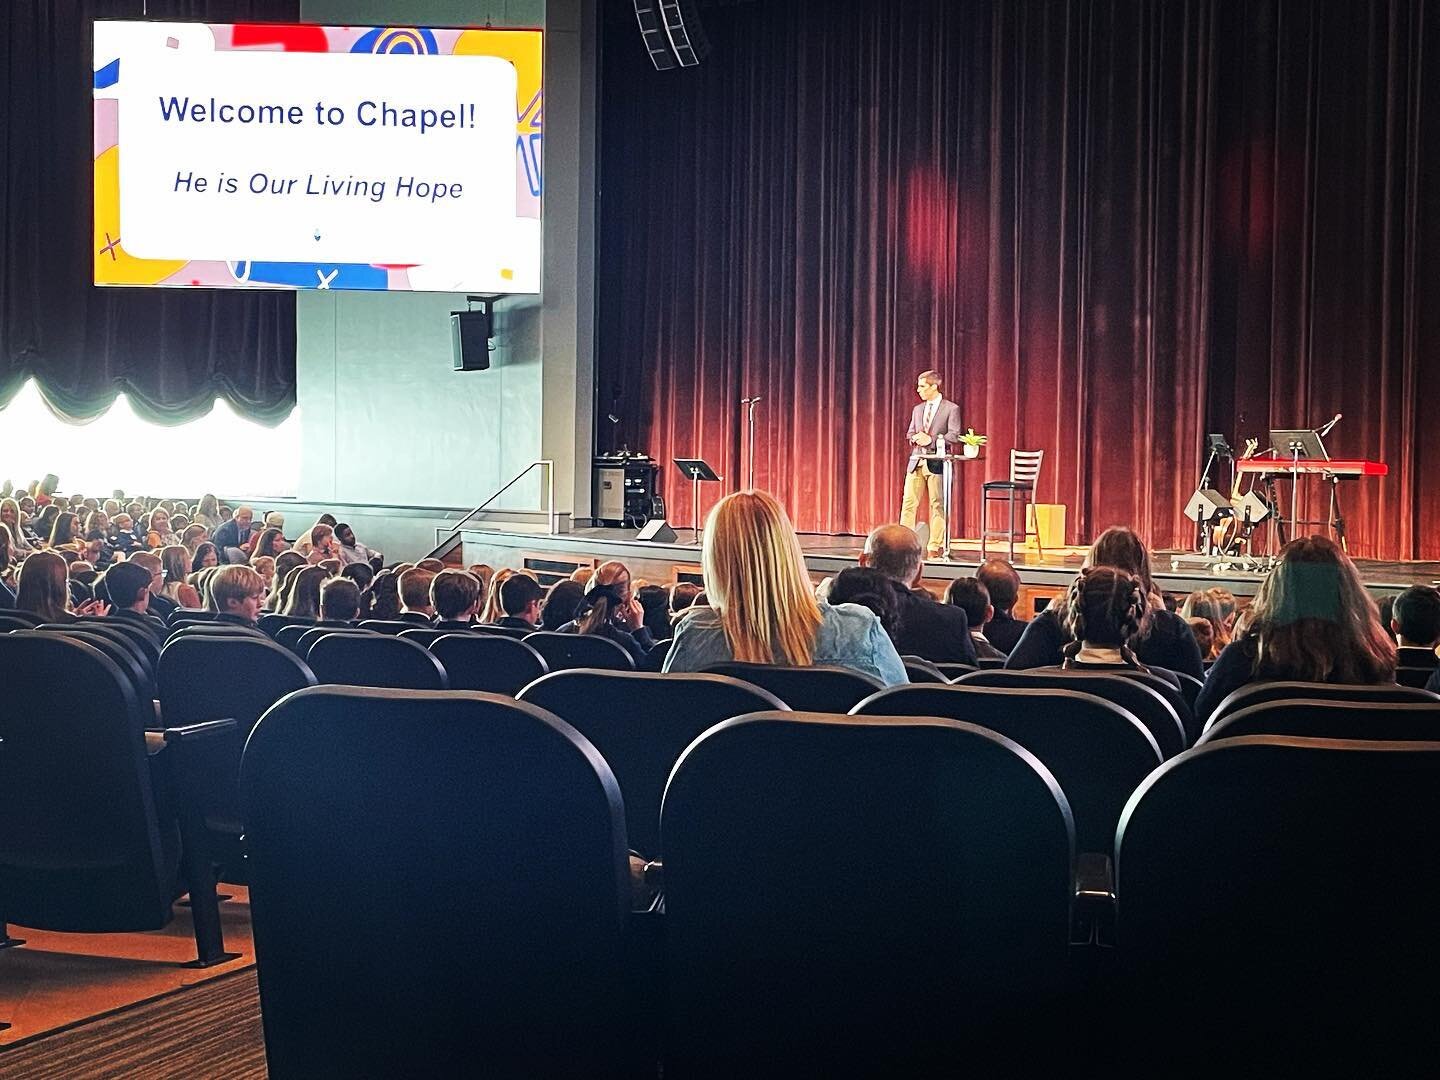 Today was our first Chapel of the school year! Interim Head of School Stephen Ready pointed our students to the living hope they have in Jesus found in 1 Peter 1:3-9, 13-21, our school verses for the year.

Ask your students if they remember this imp